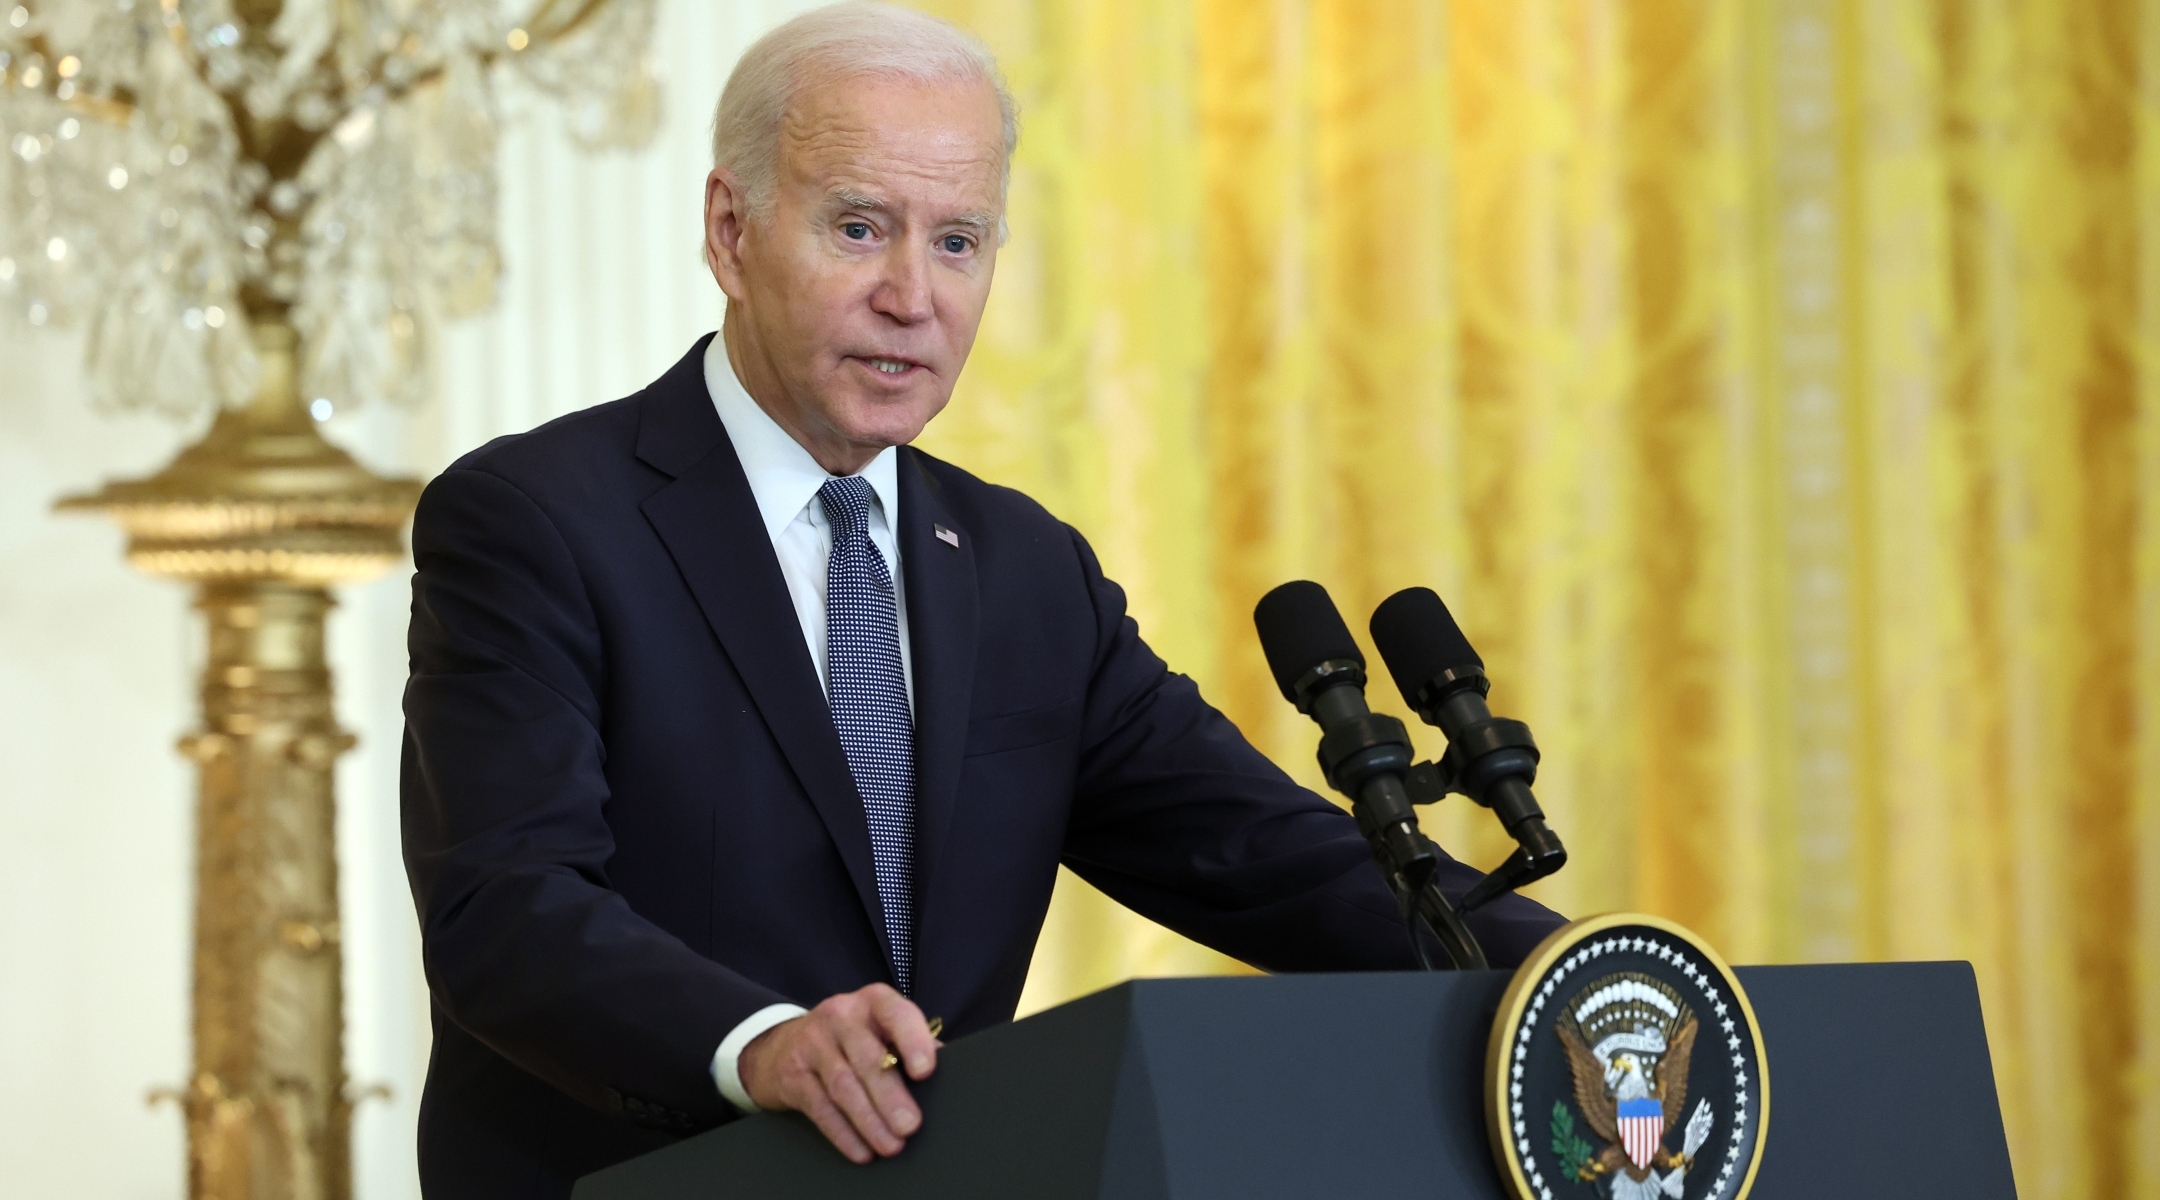 President Joe Biden answers a question during a joint press conference with French President Emmanuel Macron at the White House during an official state visit, Dec. 01, 2022. (Kevin Dietsch/Getty Images)